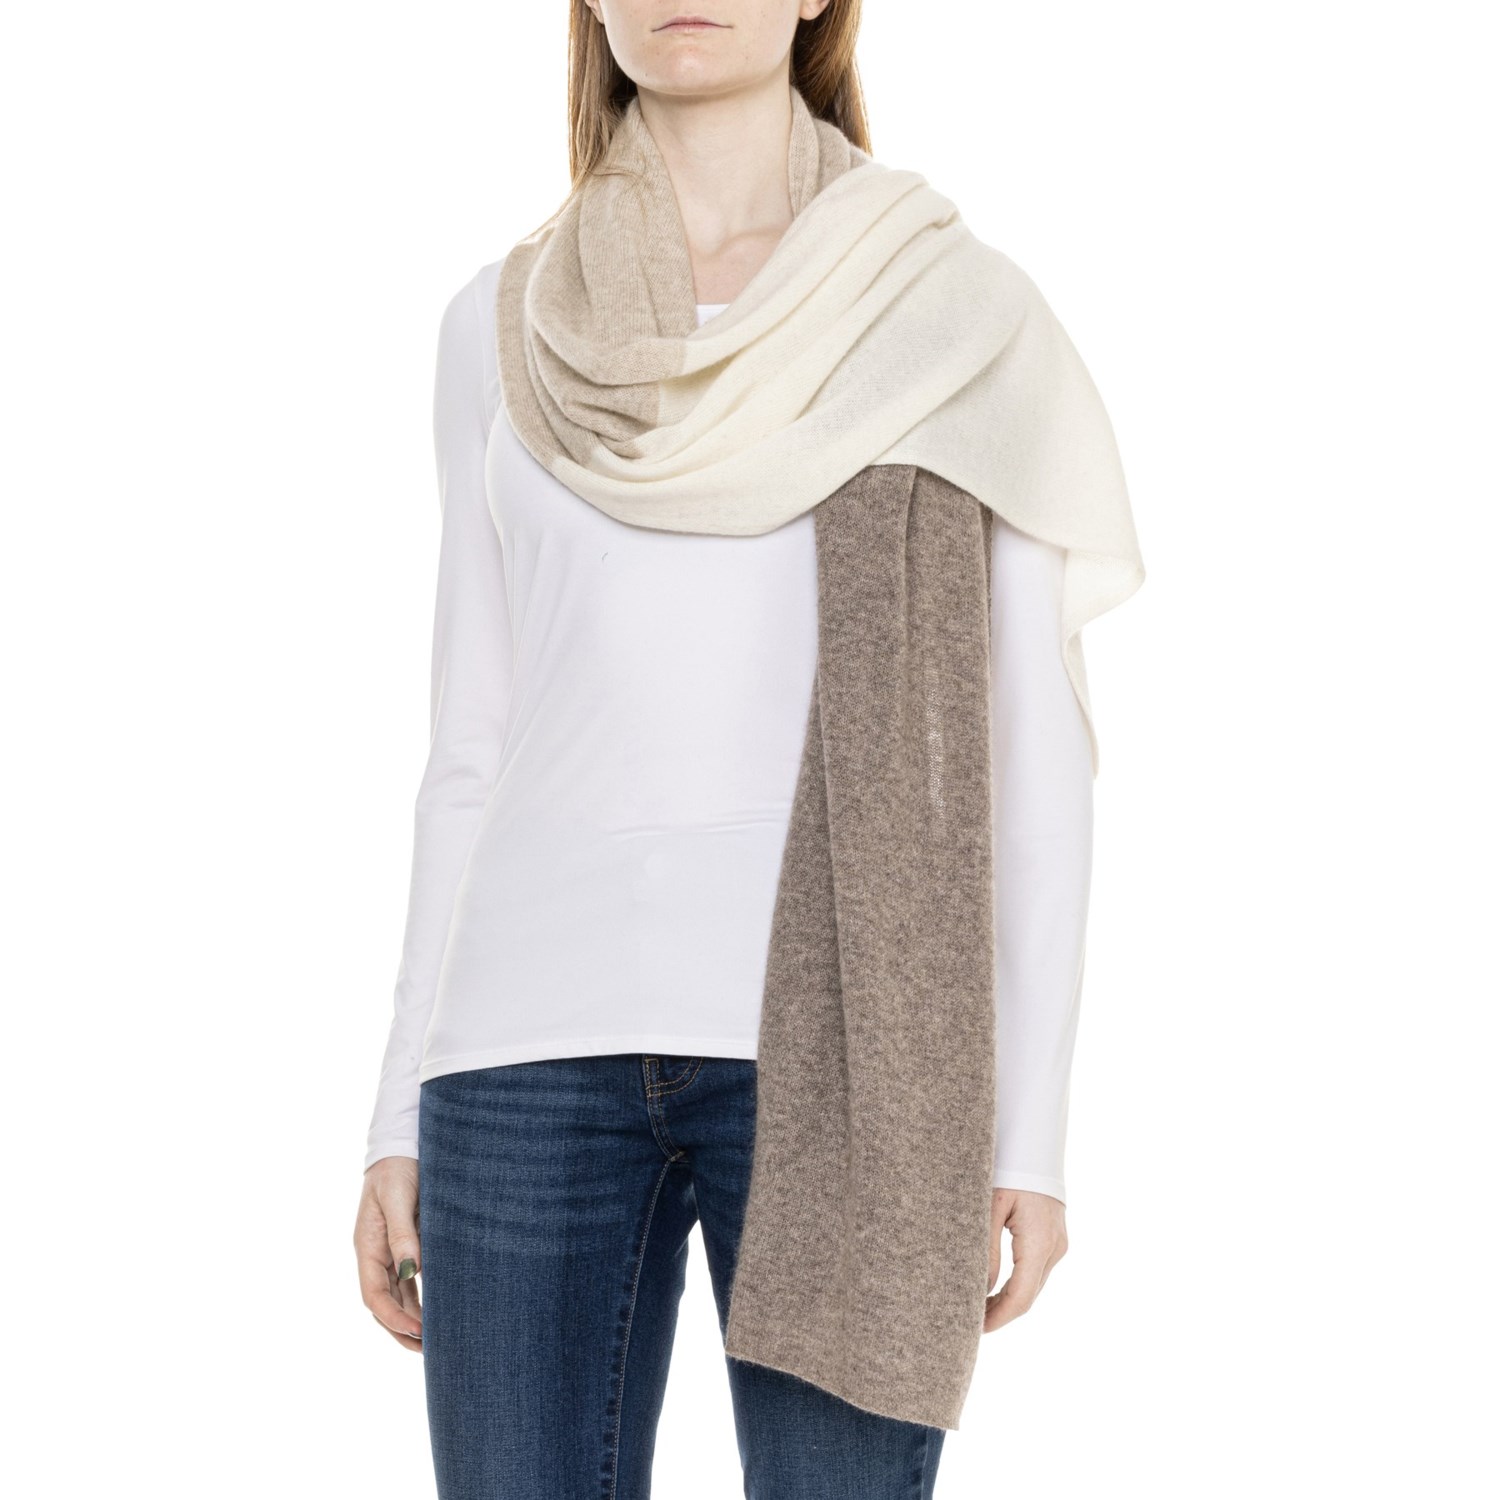 Tahari Color-Blocked Travel Scarf (For Women) - Save 23%